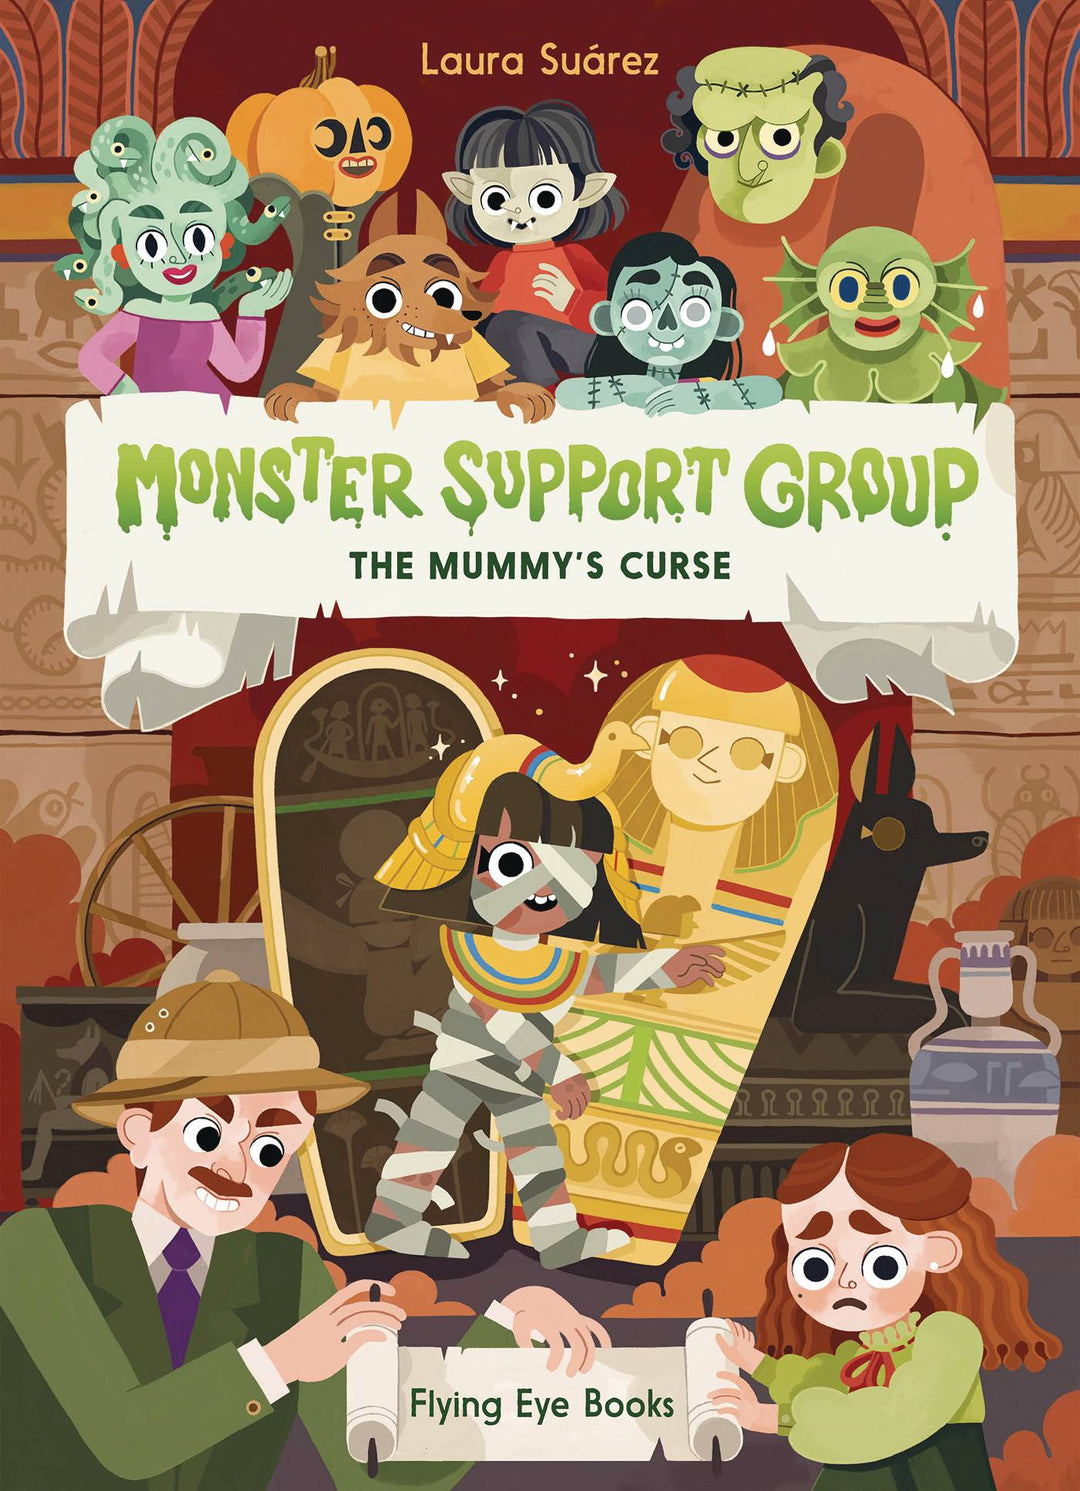 Monster Support Group The Mummy's Curse